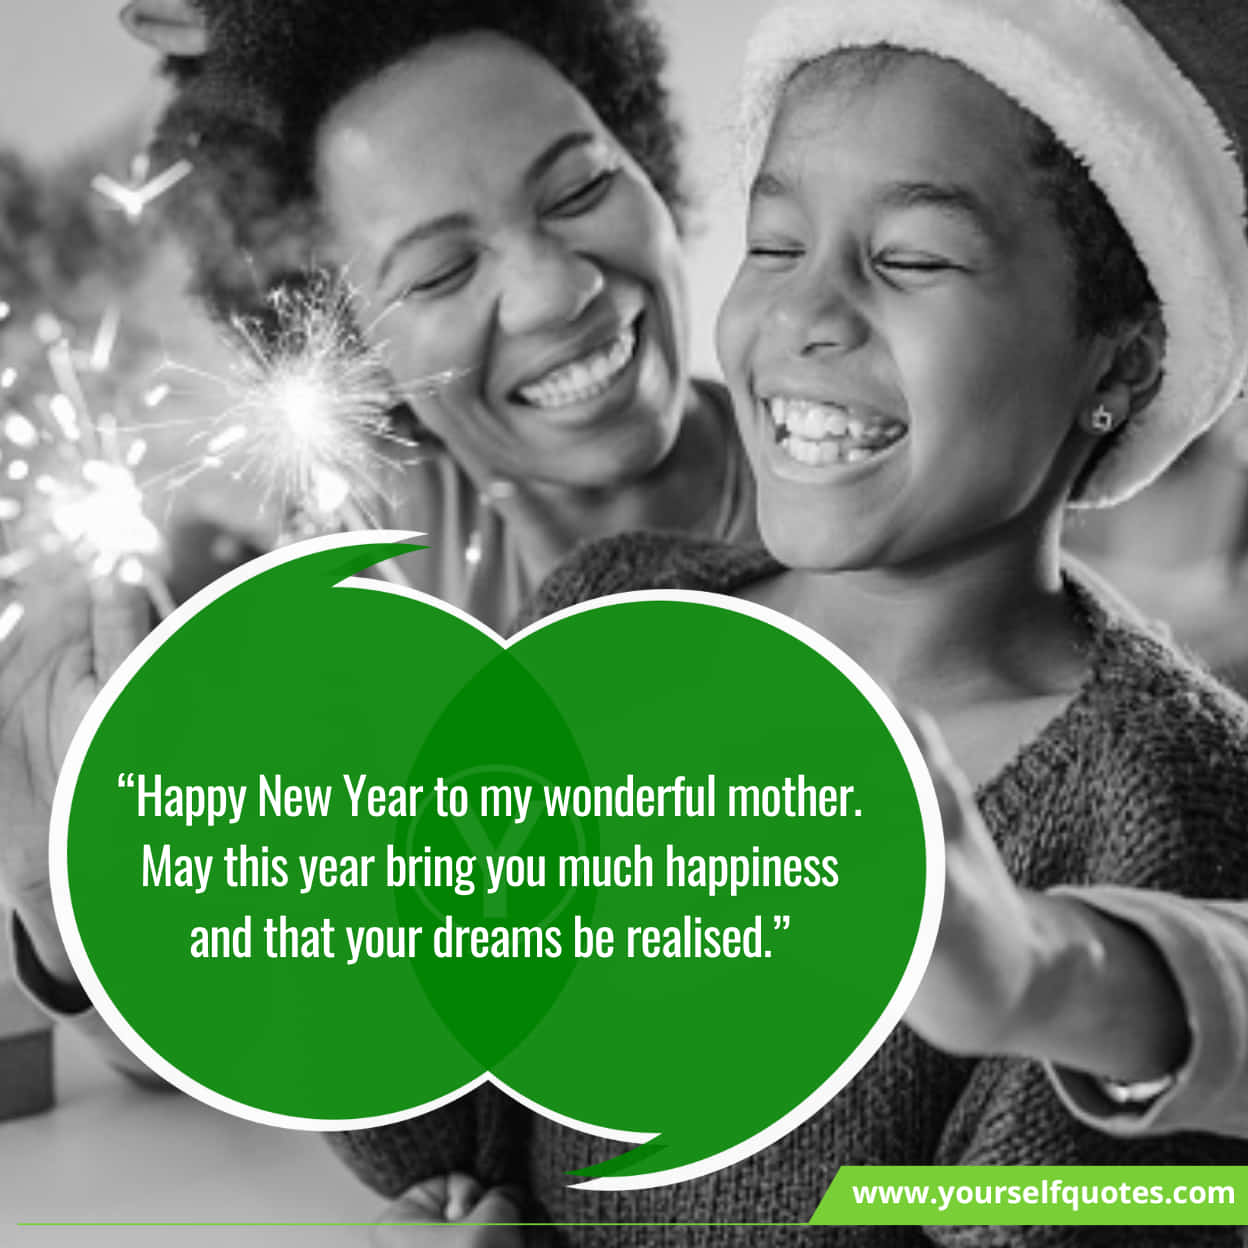 New Year Wishes for Your Mother